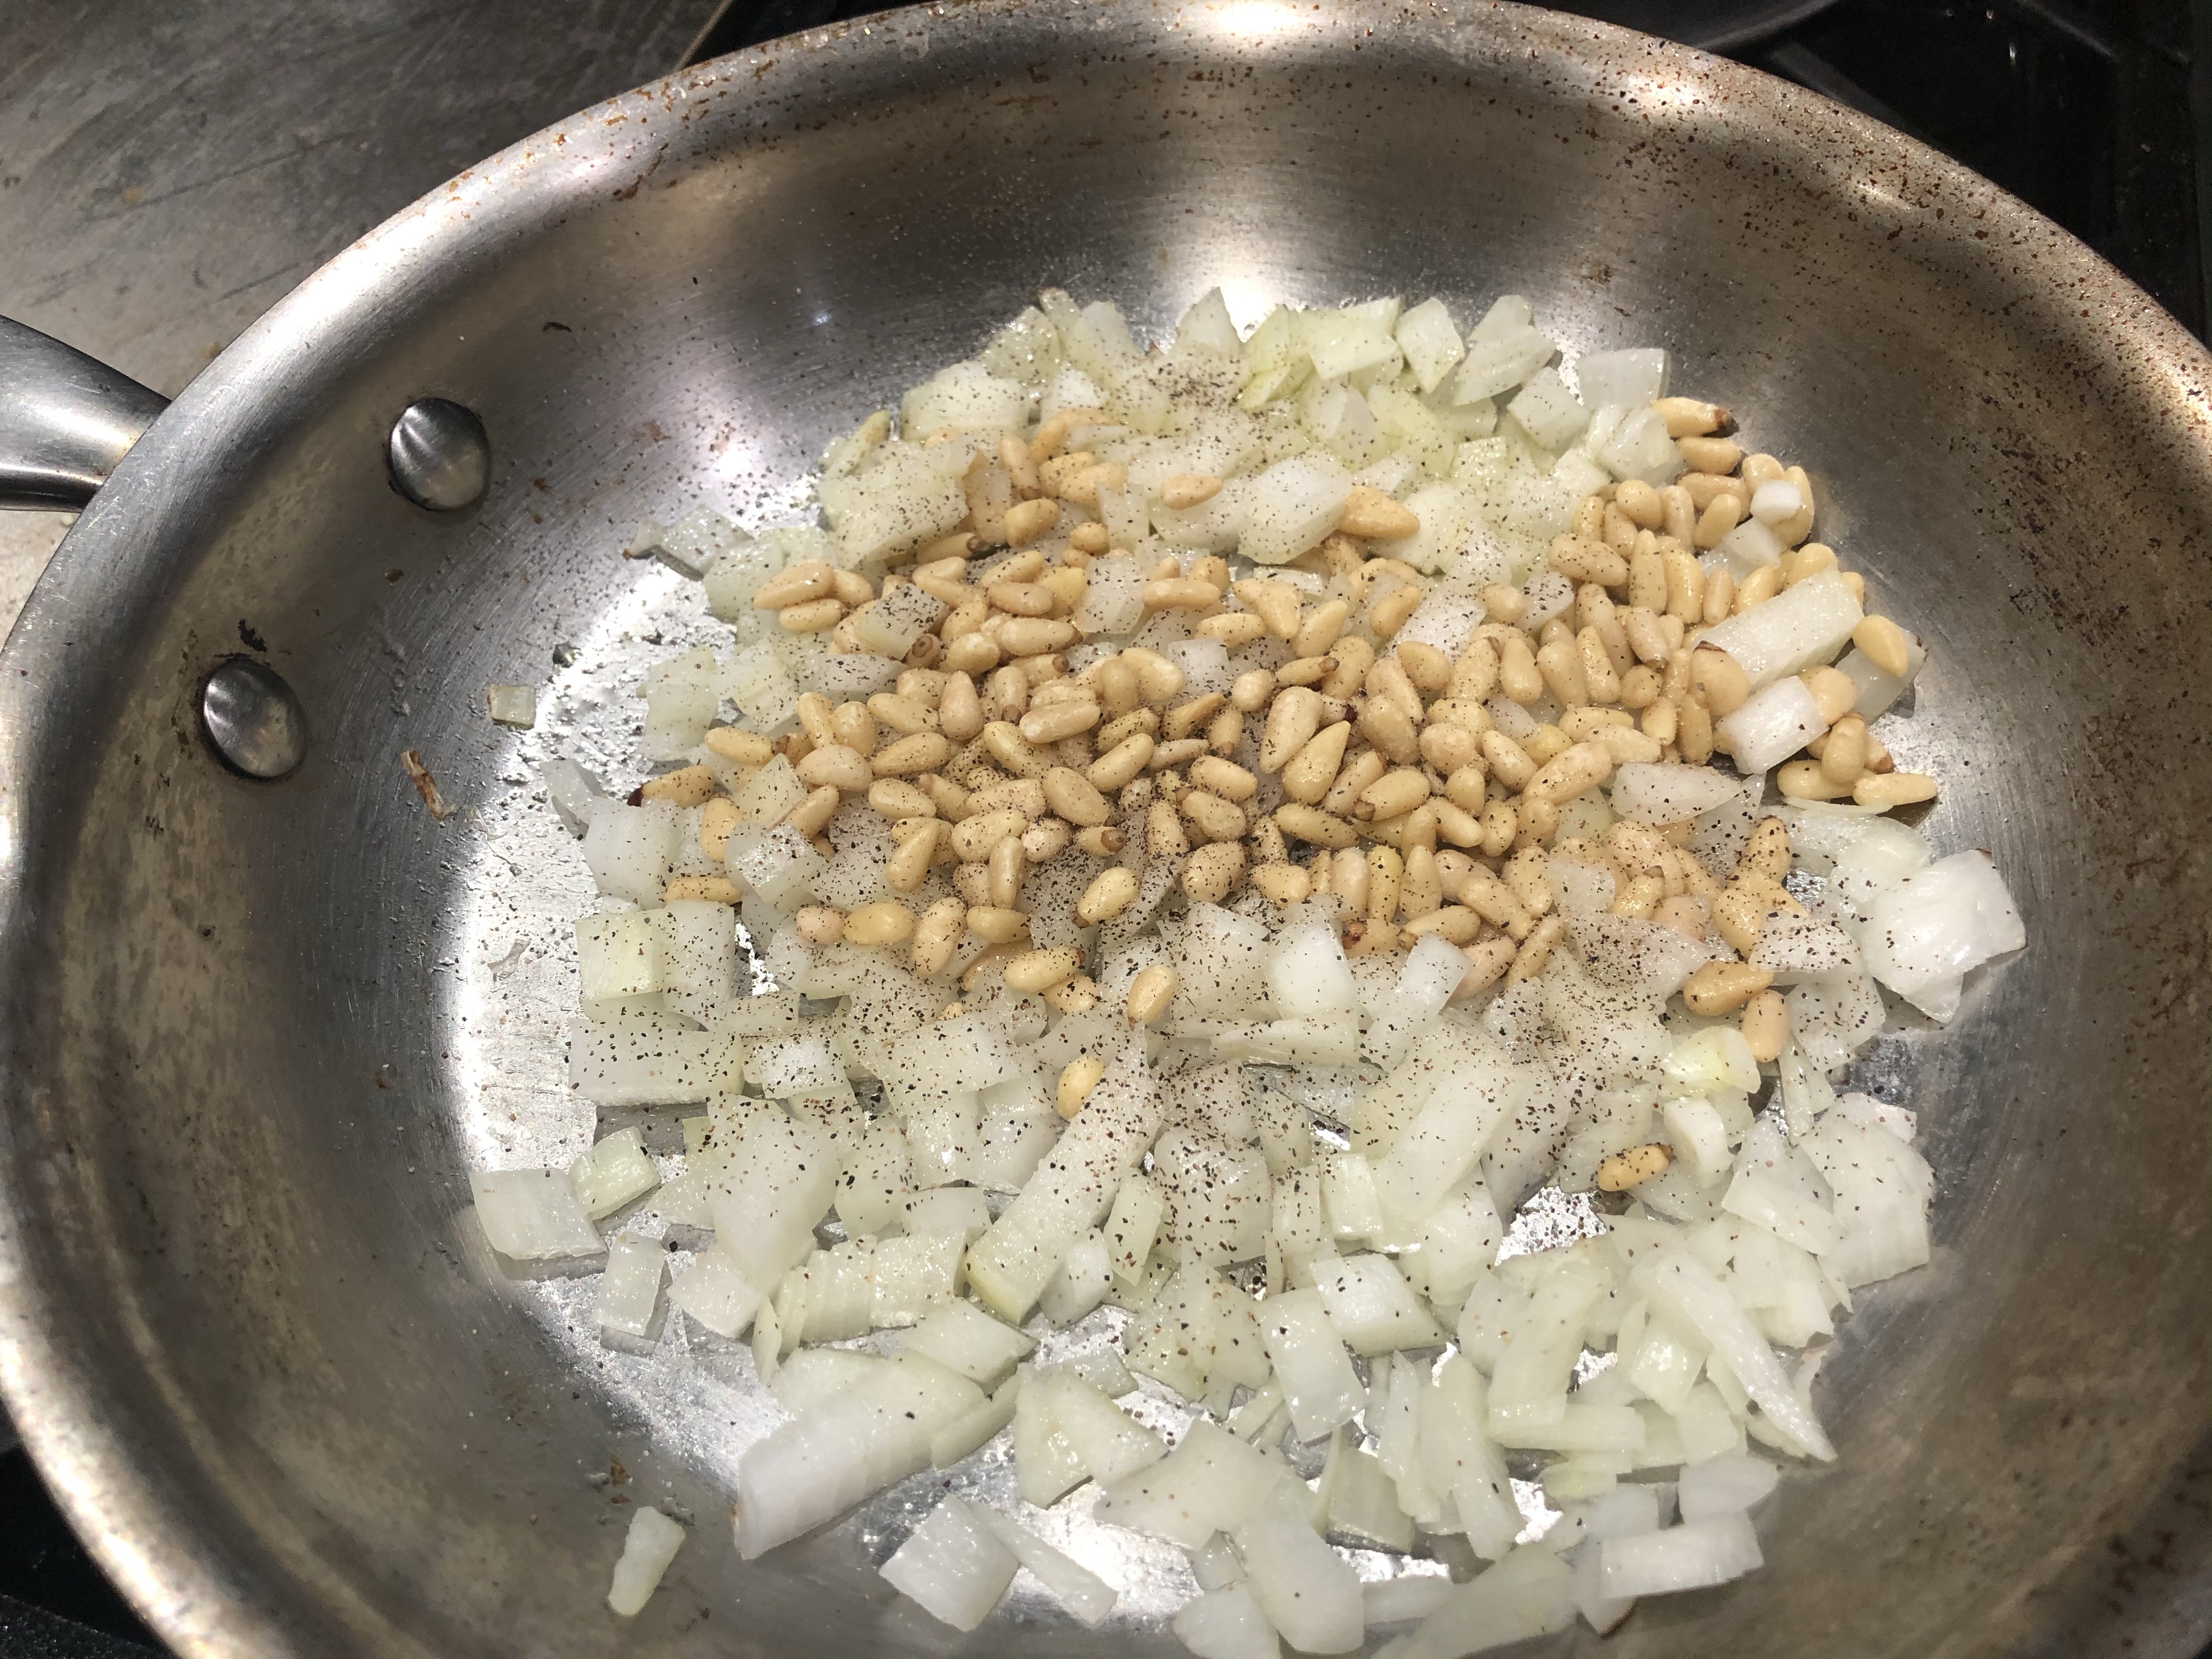 Seasoned onions and pine nuts in sauté pan.